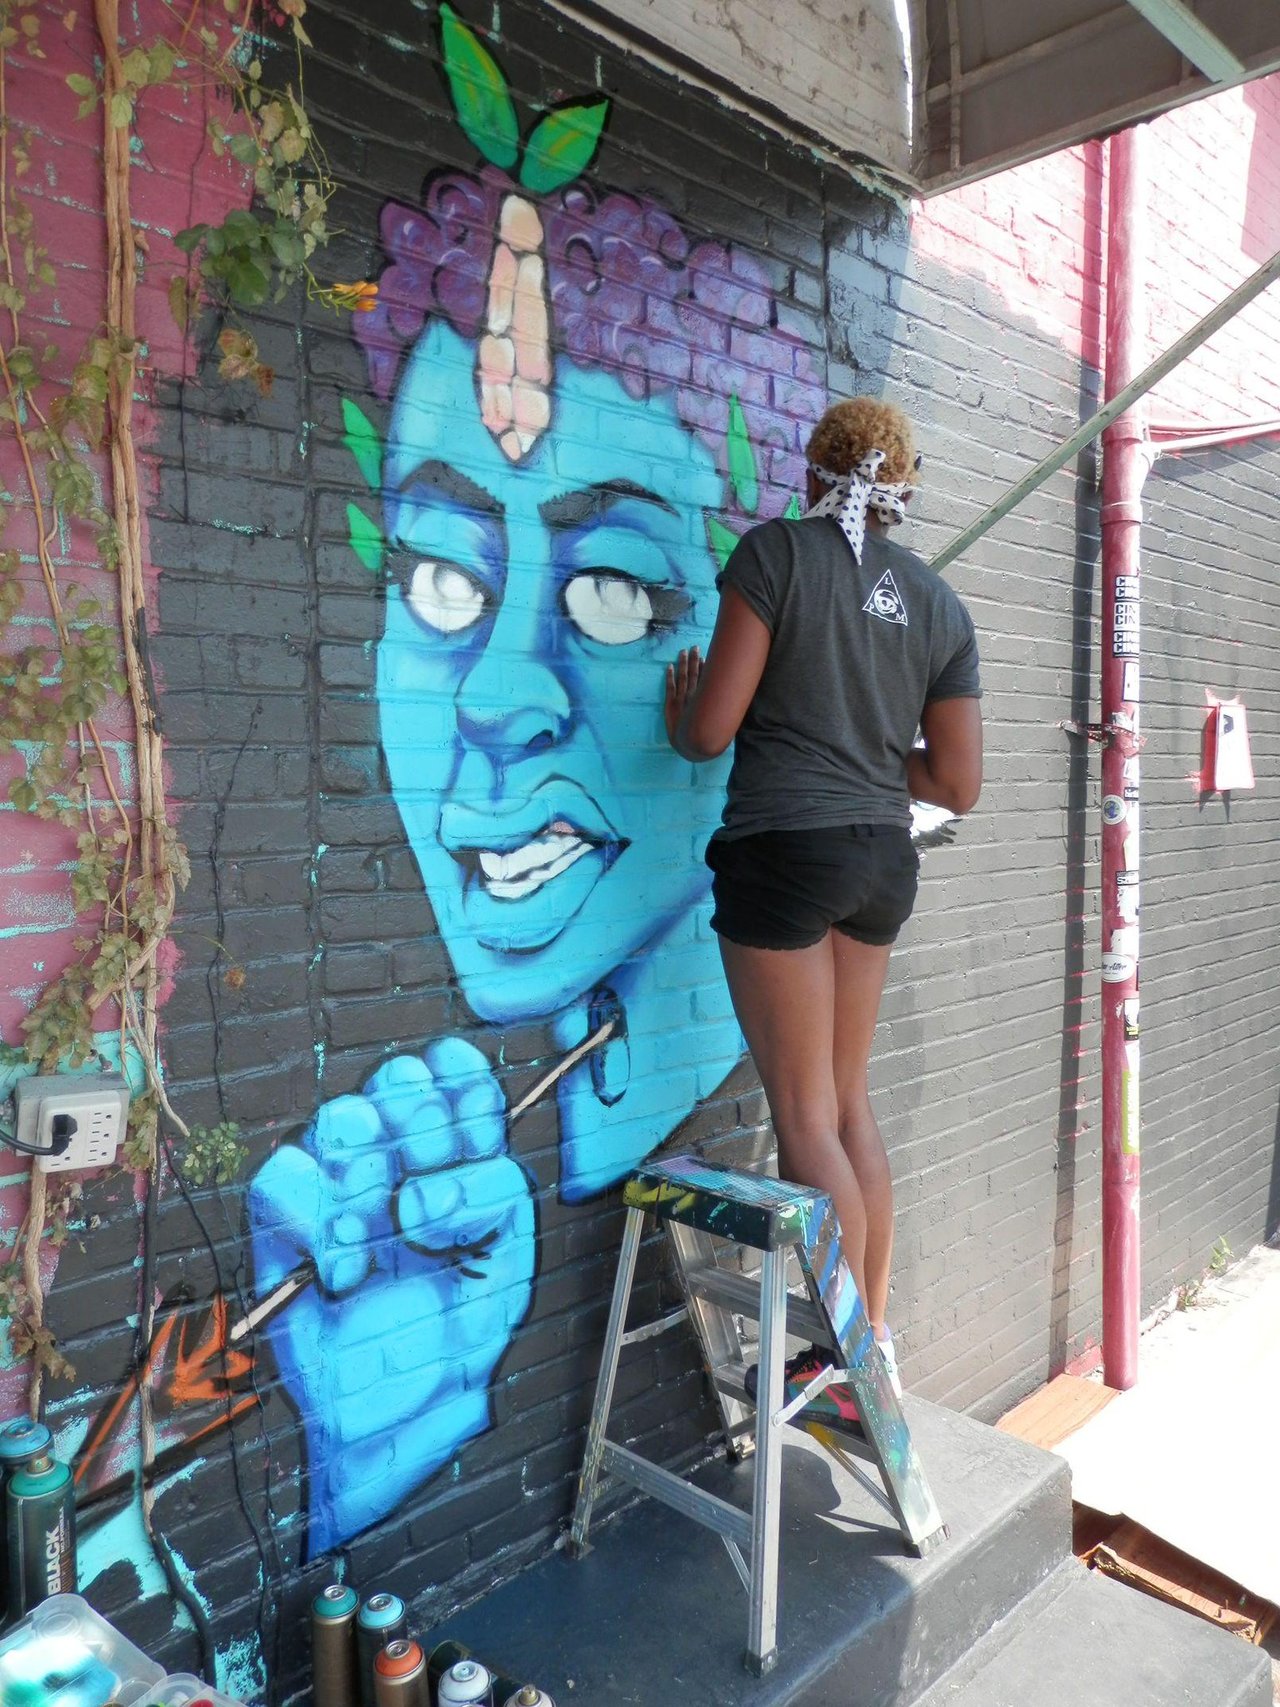 #Houston #Graffiti #Streetart Roshi (Austin) working on her art at Super Happy Funland for Meeting of Styles 2015. http://t.co/HOUoXQVbQD